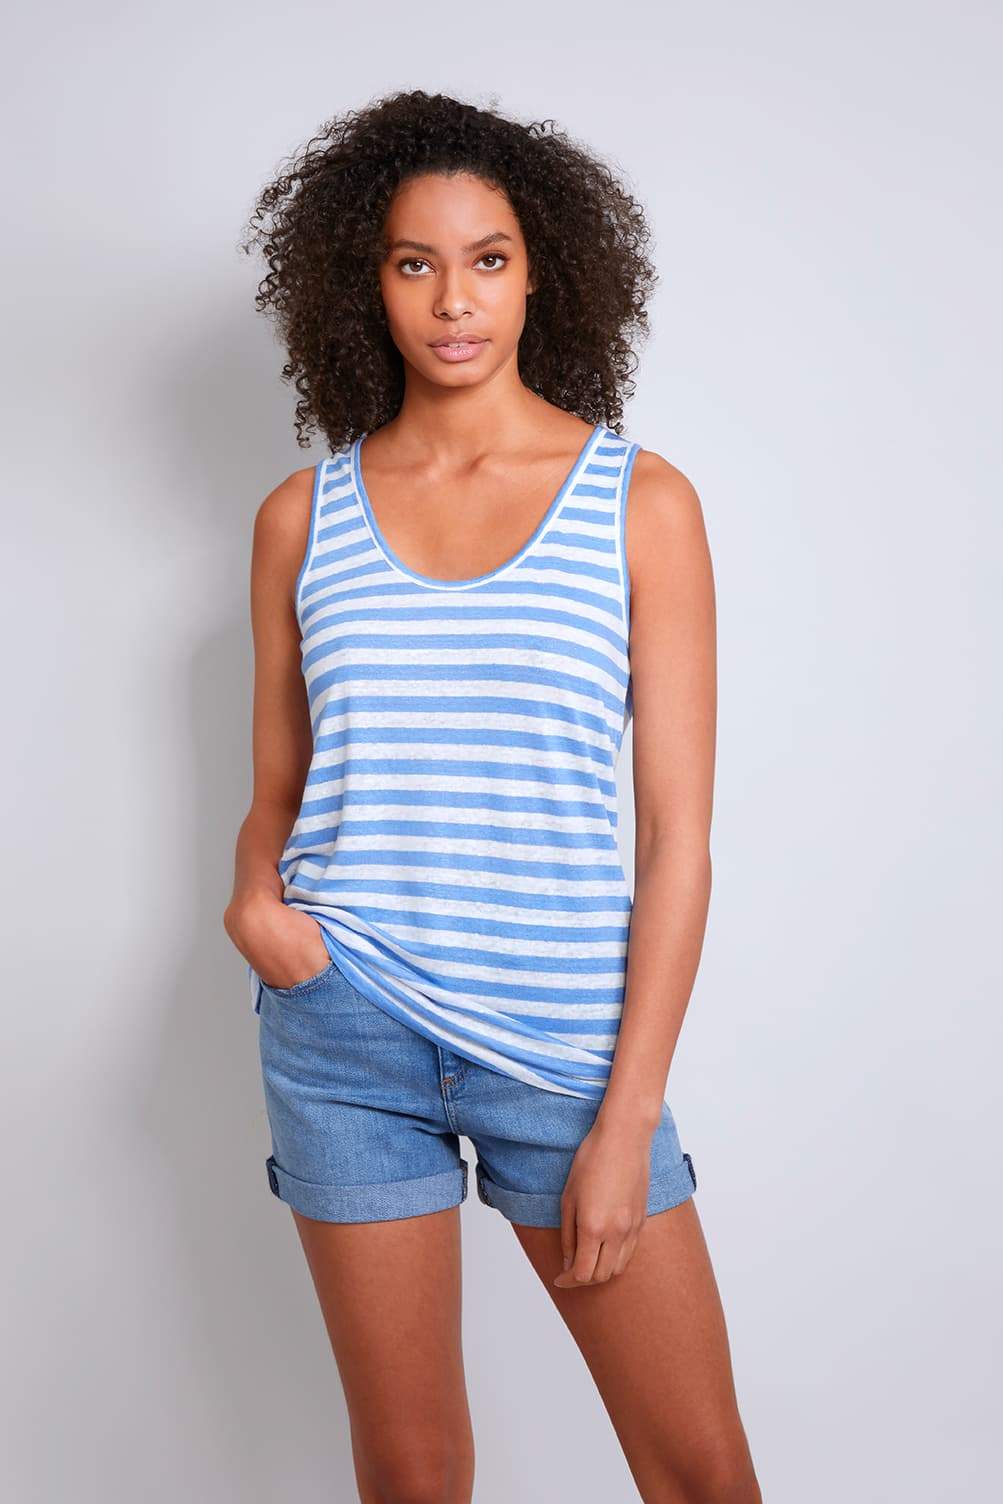 Women's blue white Striped Linen Sleeveless Tank Top by Lavender Hill Clothing